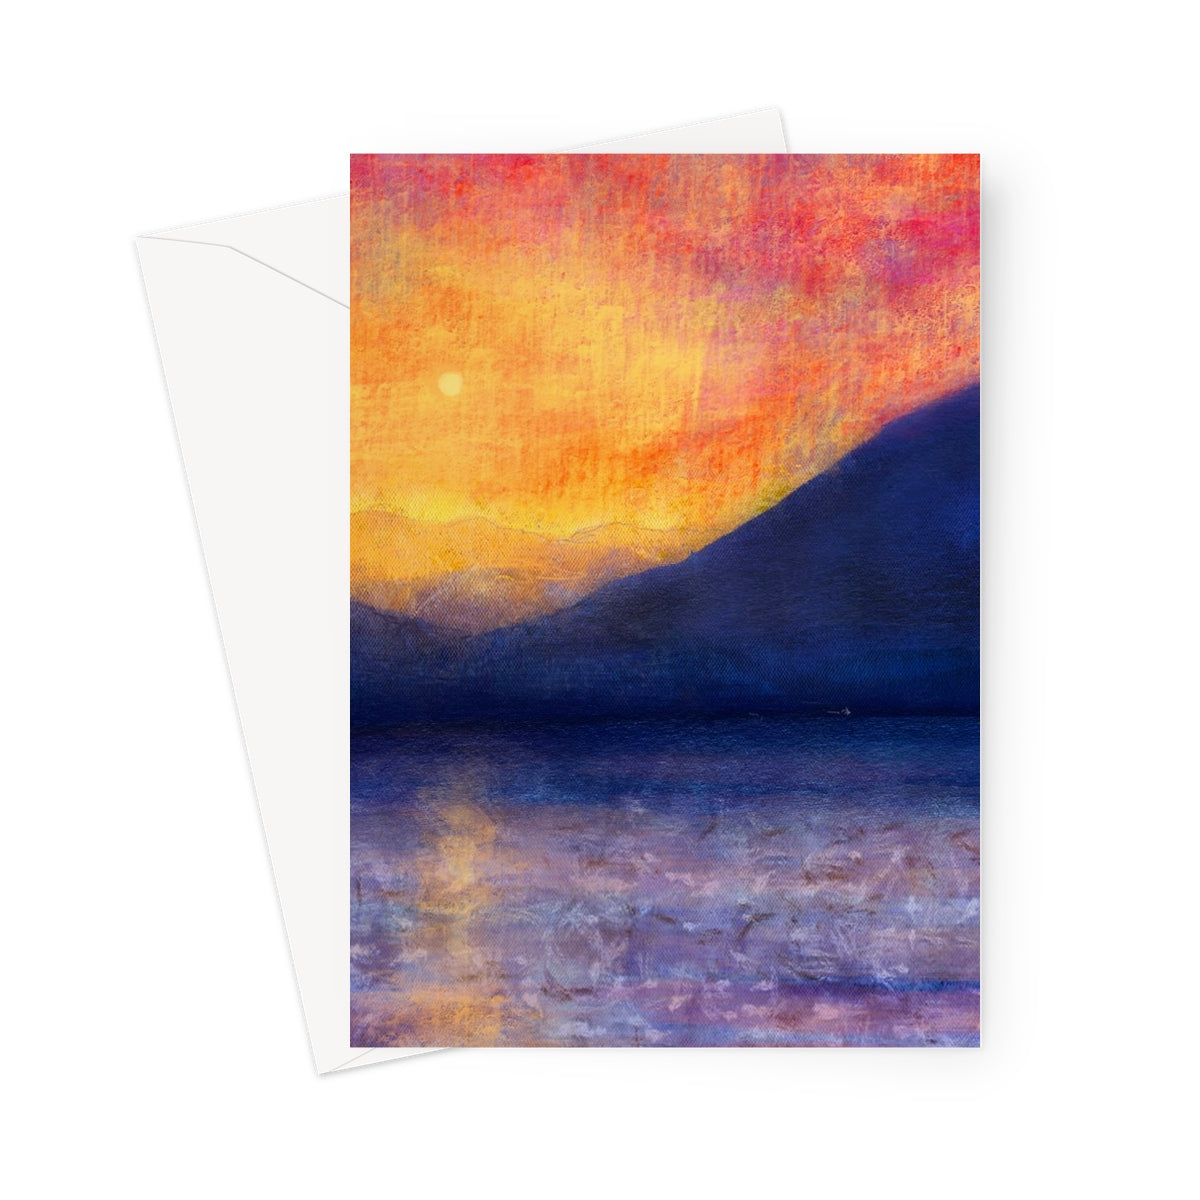 Sunset Approaching Mull Art Gifts Greeting Card-Greetings Cards-Hebridean Islands Art Gallery-5"x7"-1 Card-Paintings, Prints, Homeware, Art Gifts From Scotland By Scottish Artist Kevin Hunter